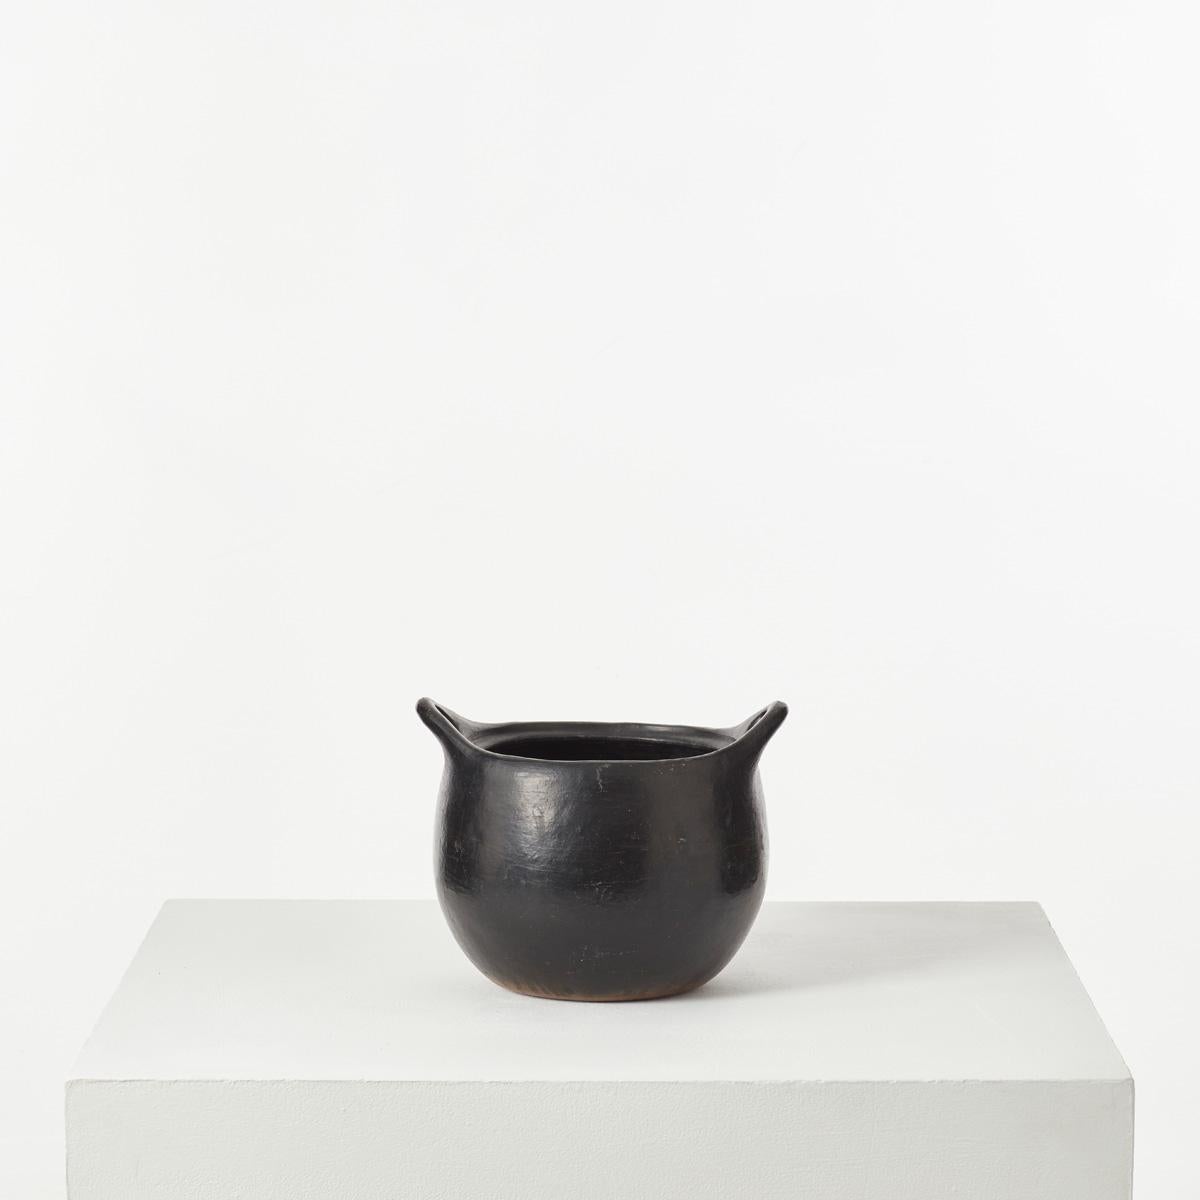 A modest yet beautifully formed natural clay pot. The vessel resembles ancient cookware pots from Columbia – their smooth, tactile surface arrived at by hand, polished using river stones. There are not glazed, but smoked to achieve the deep satin